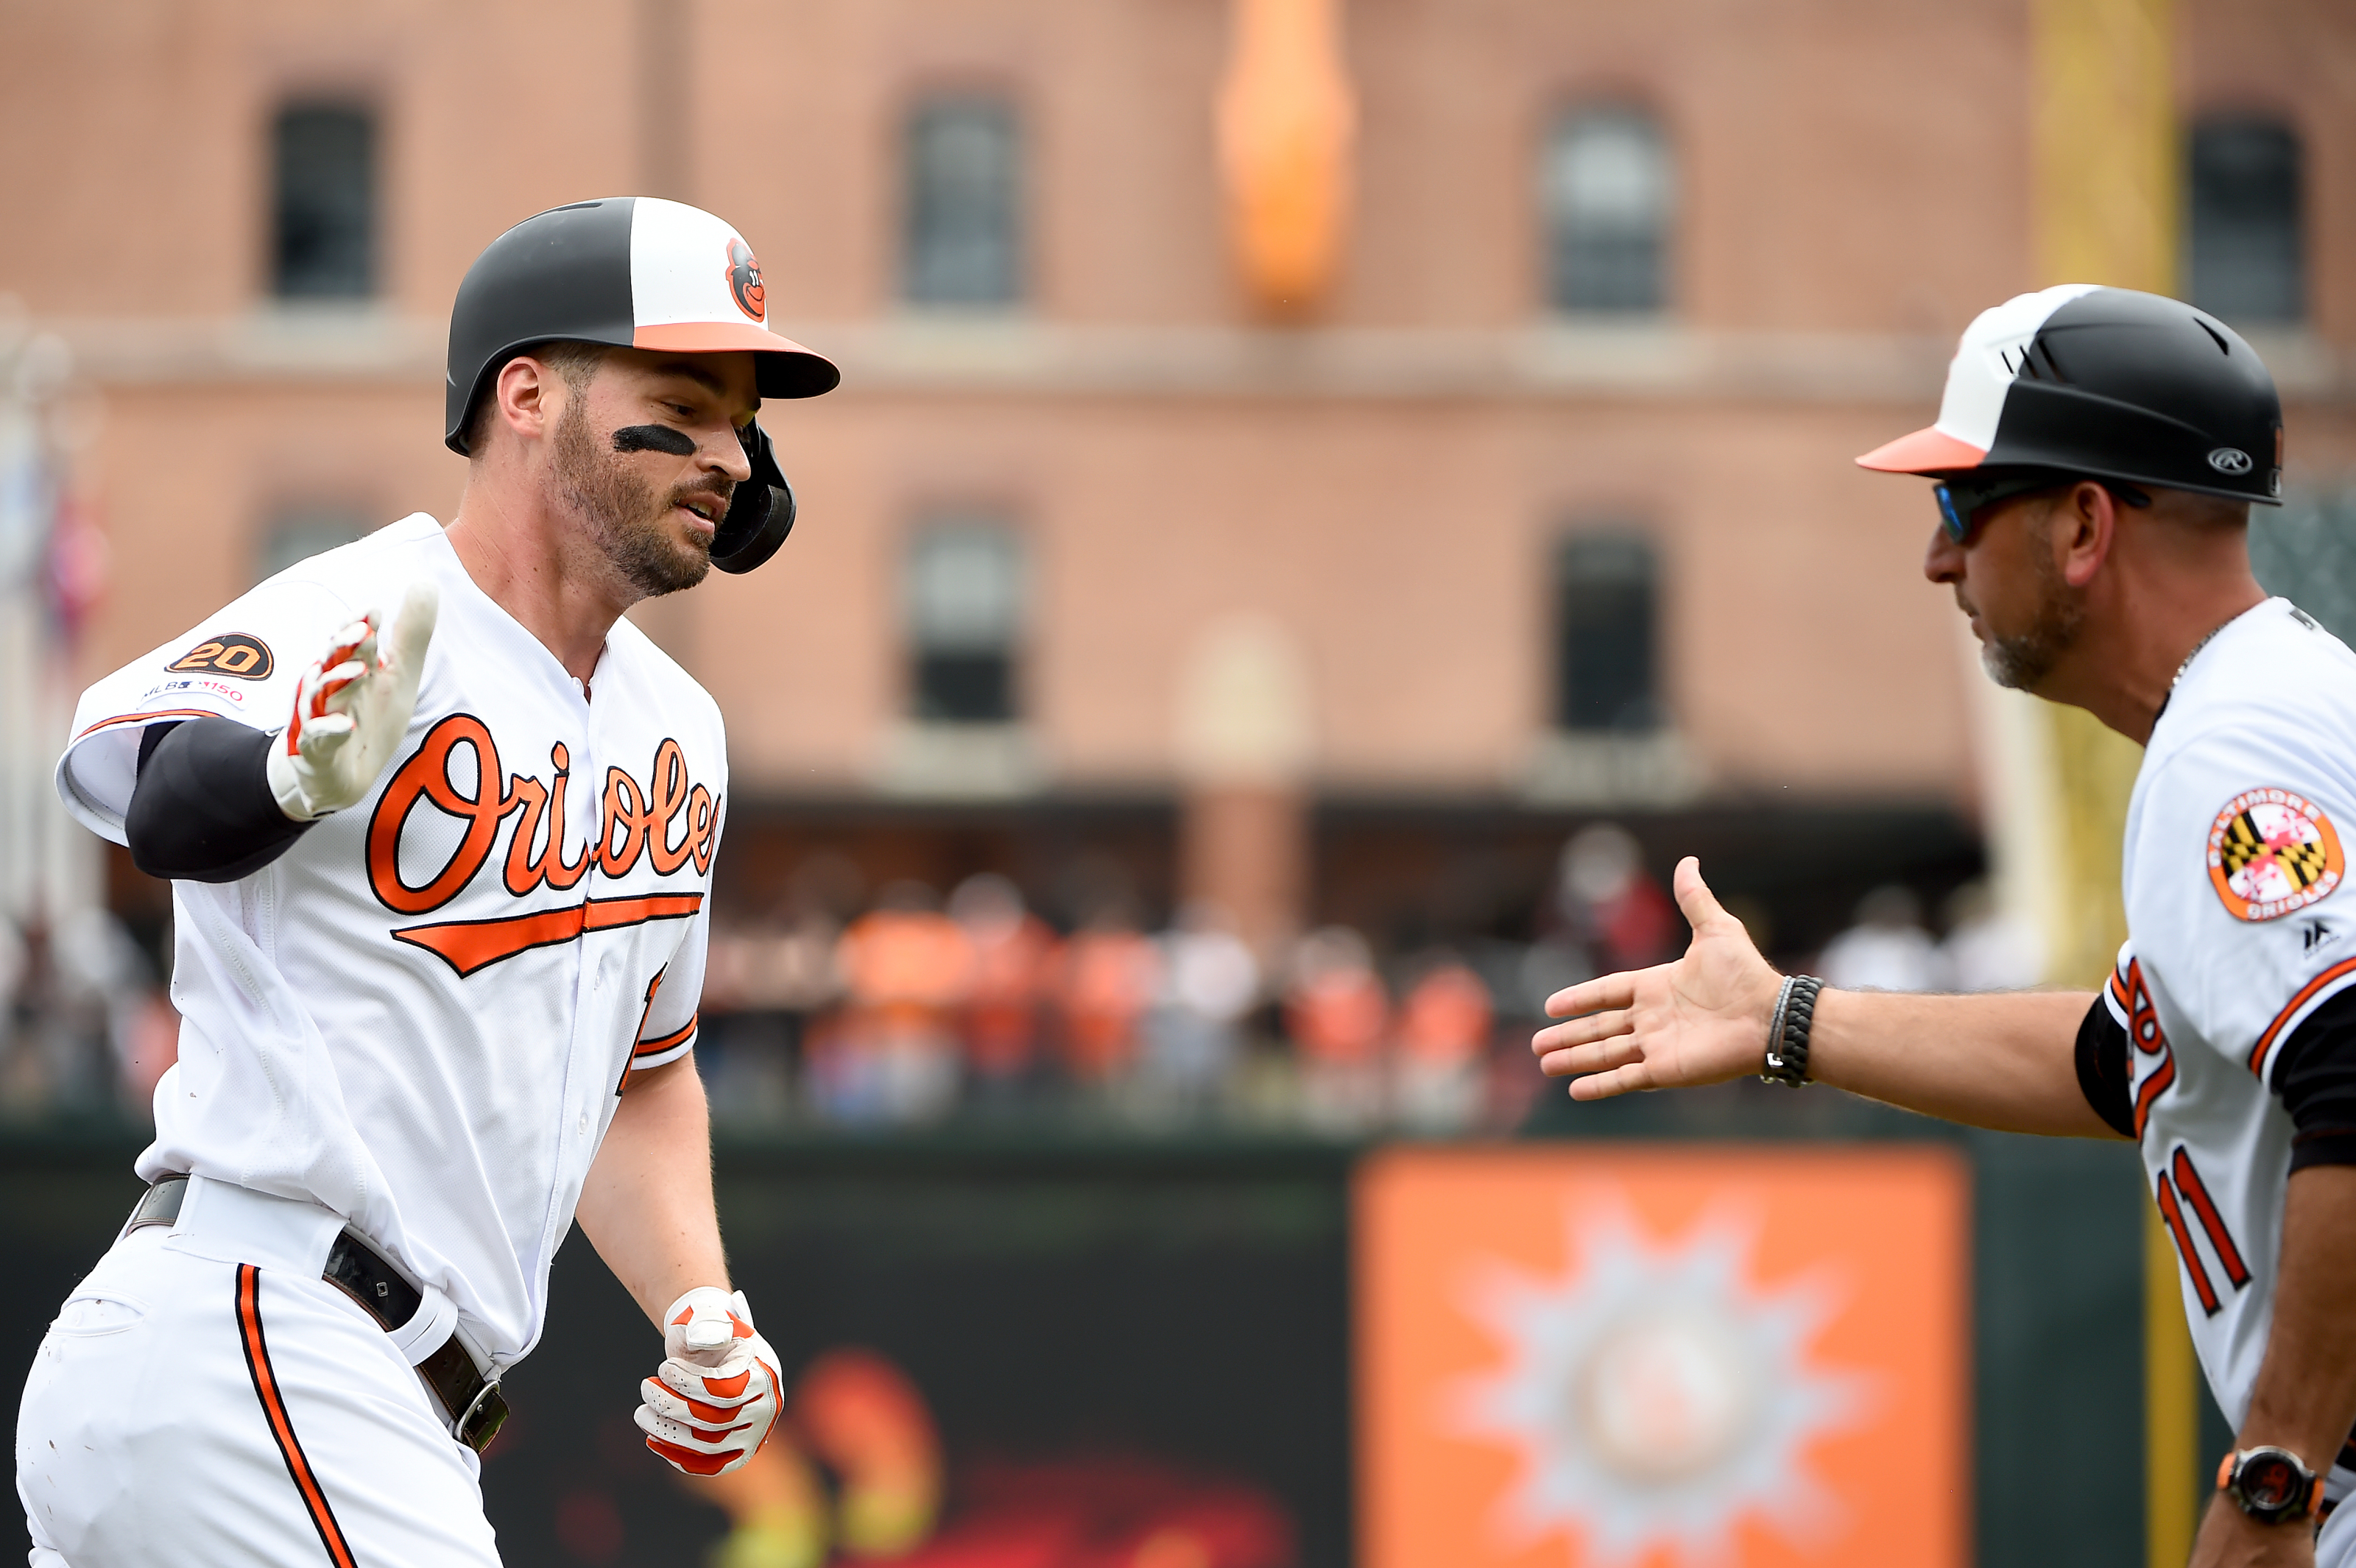 Trey Mancini, back after cancer battle, will compete in Home Run